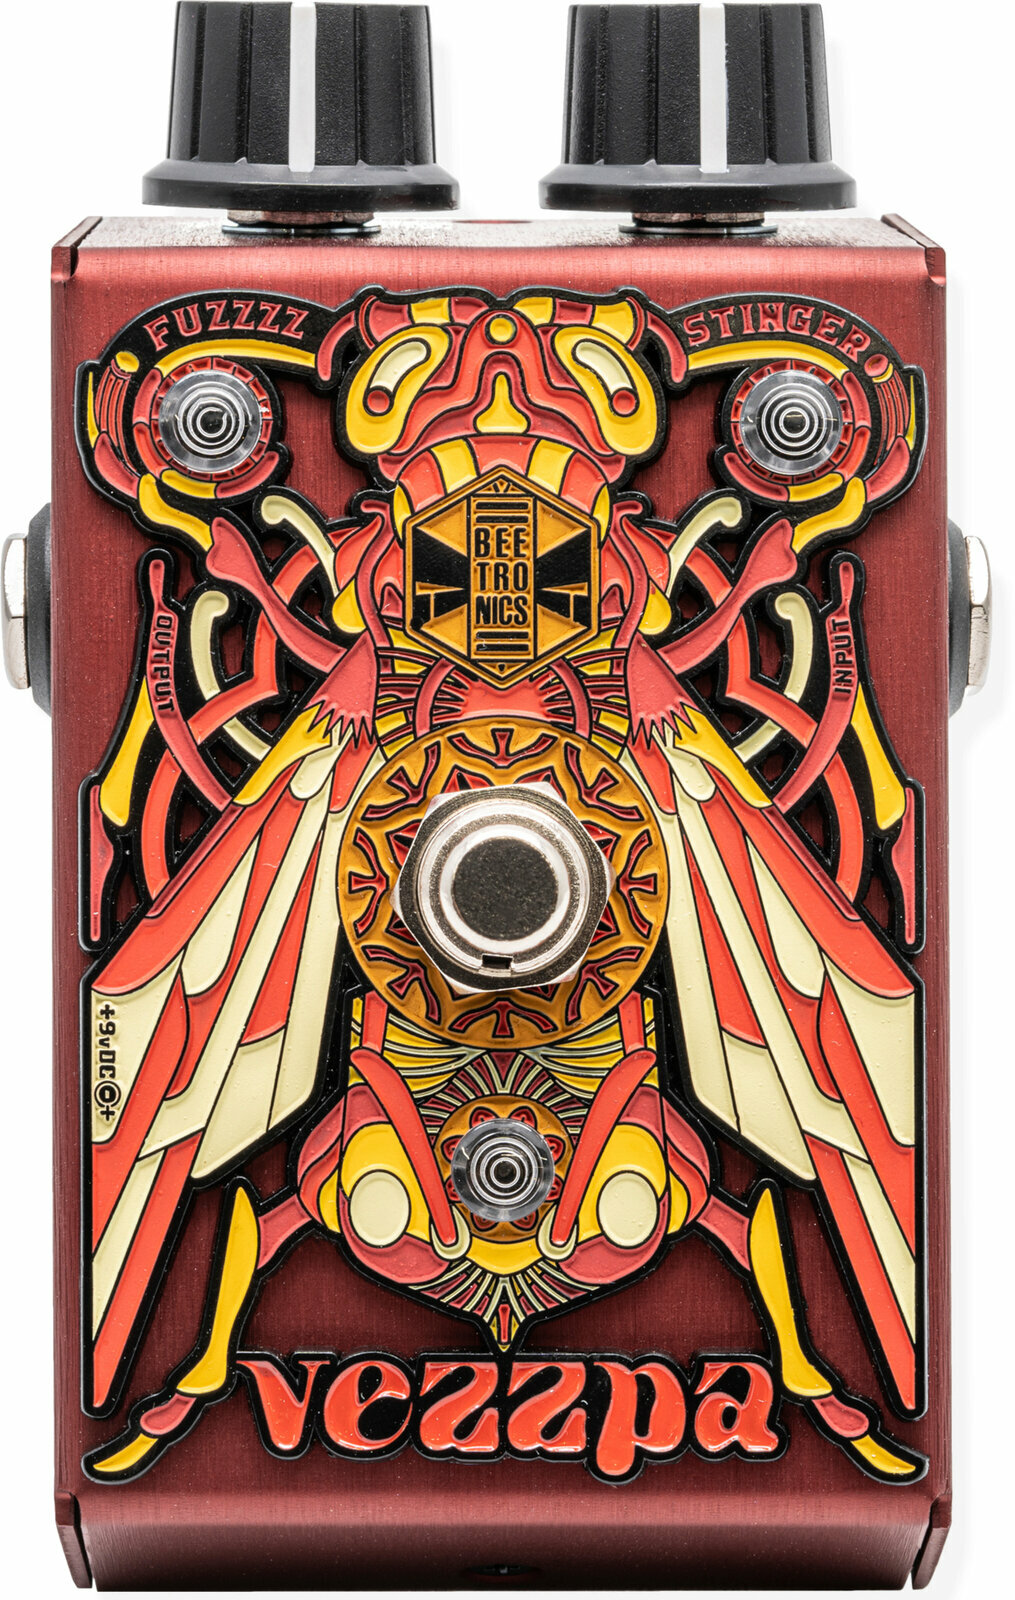 Guitar Effect Beetronics Vezzpa Omega Red (Limited Edition)